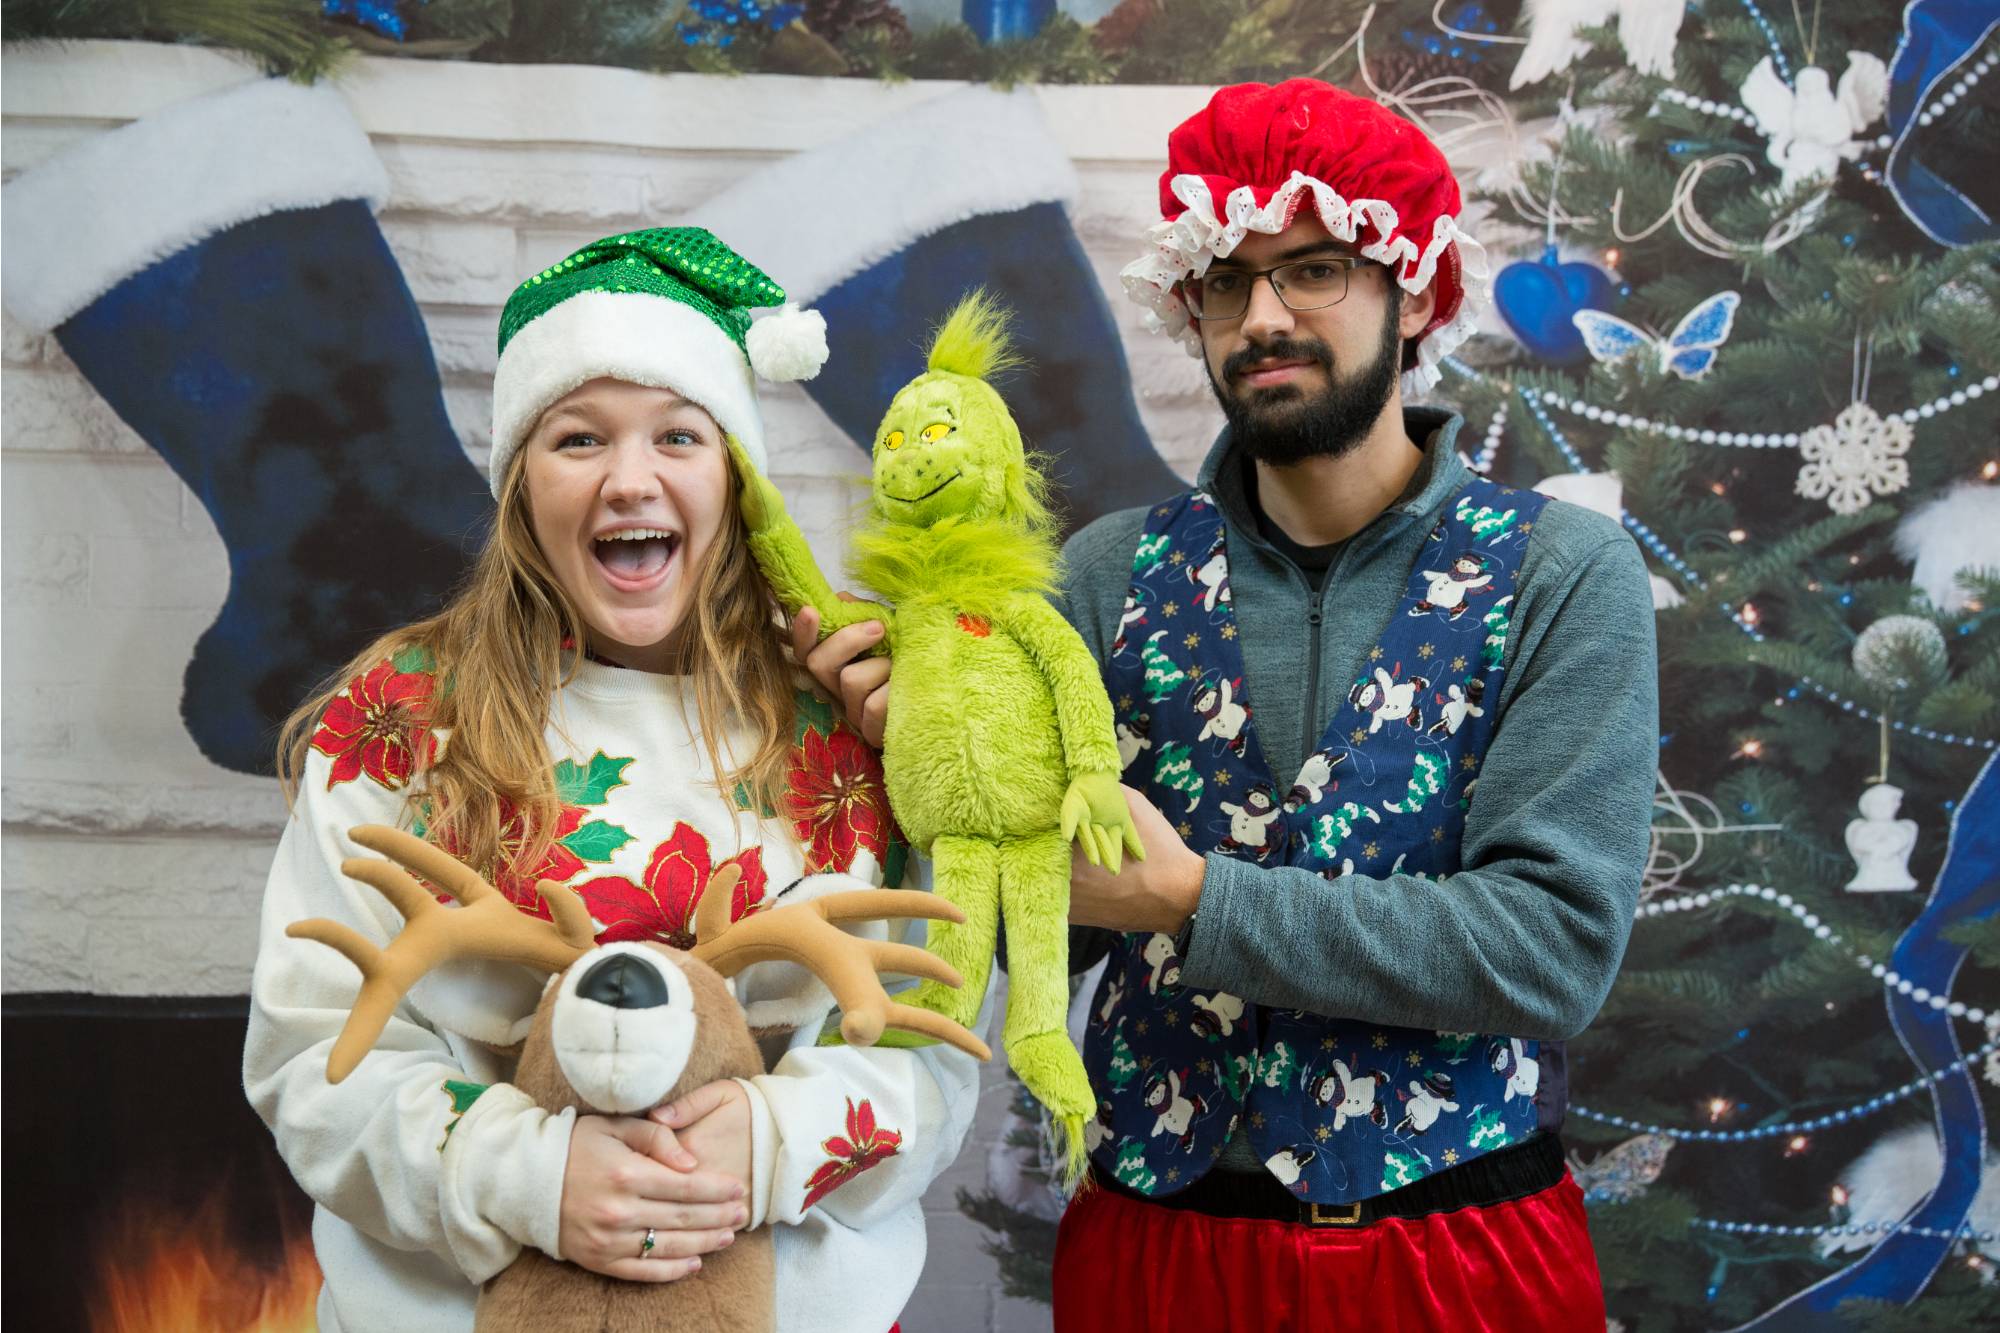 2 GVSU students dressed in Christmas clothes and holding a stuffed grinch and reindeer